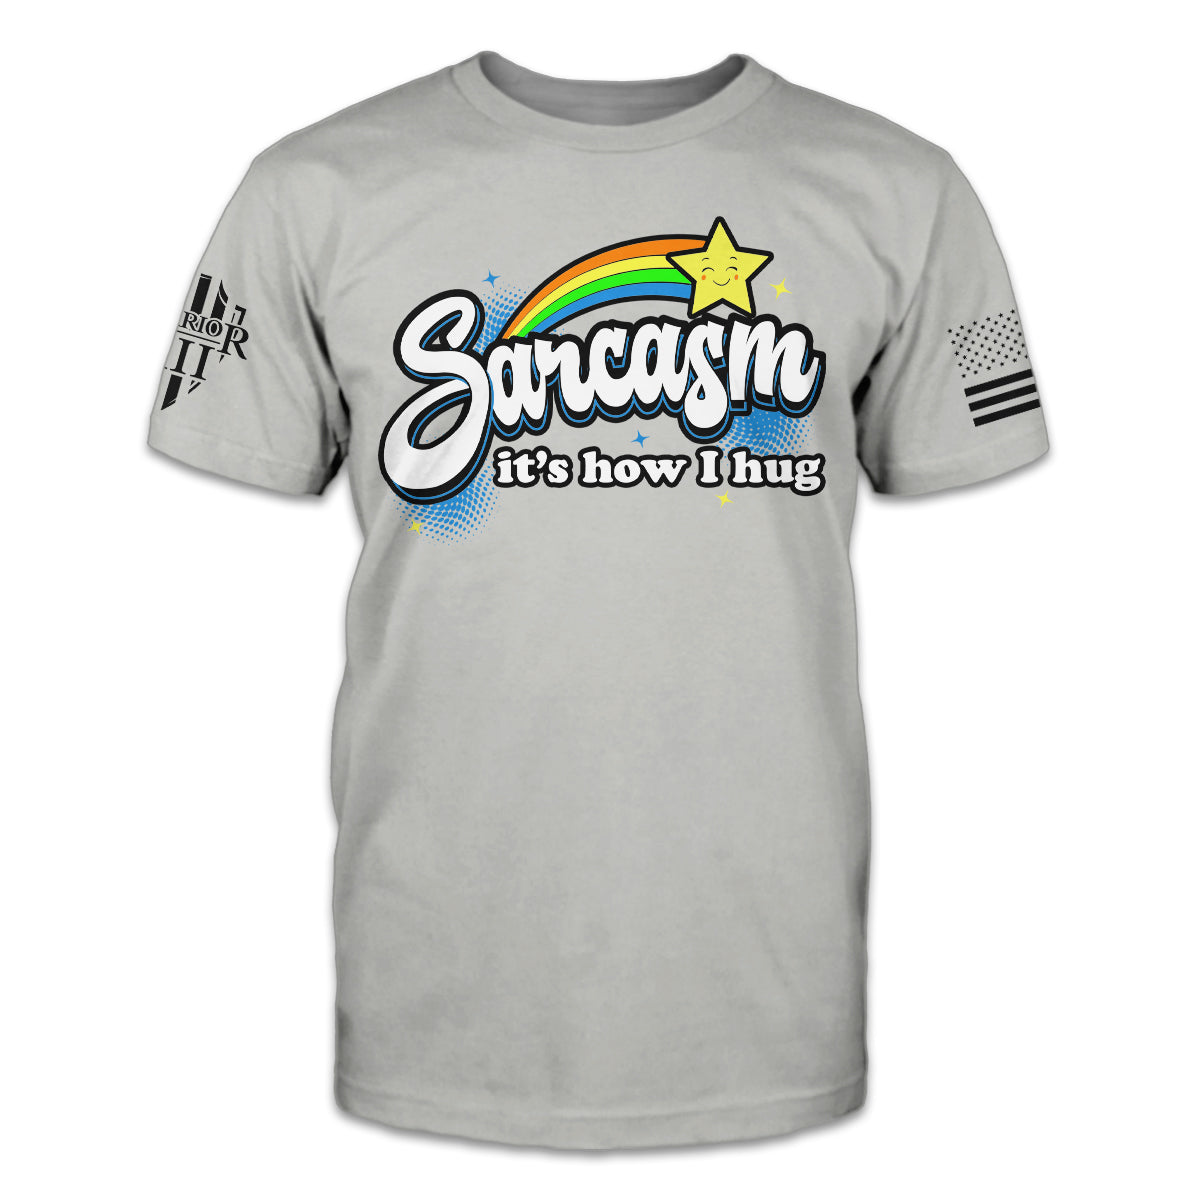 A grey t-shirt with the words "Sarcasm; it's how I hug" with a rainbow and shooting star printed on the front of the shirt.